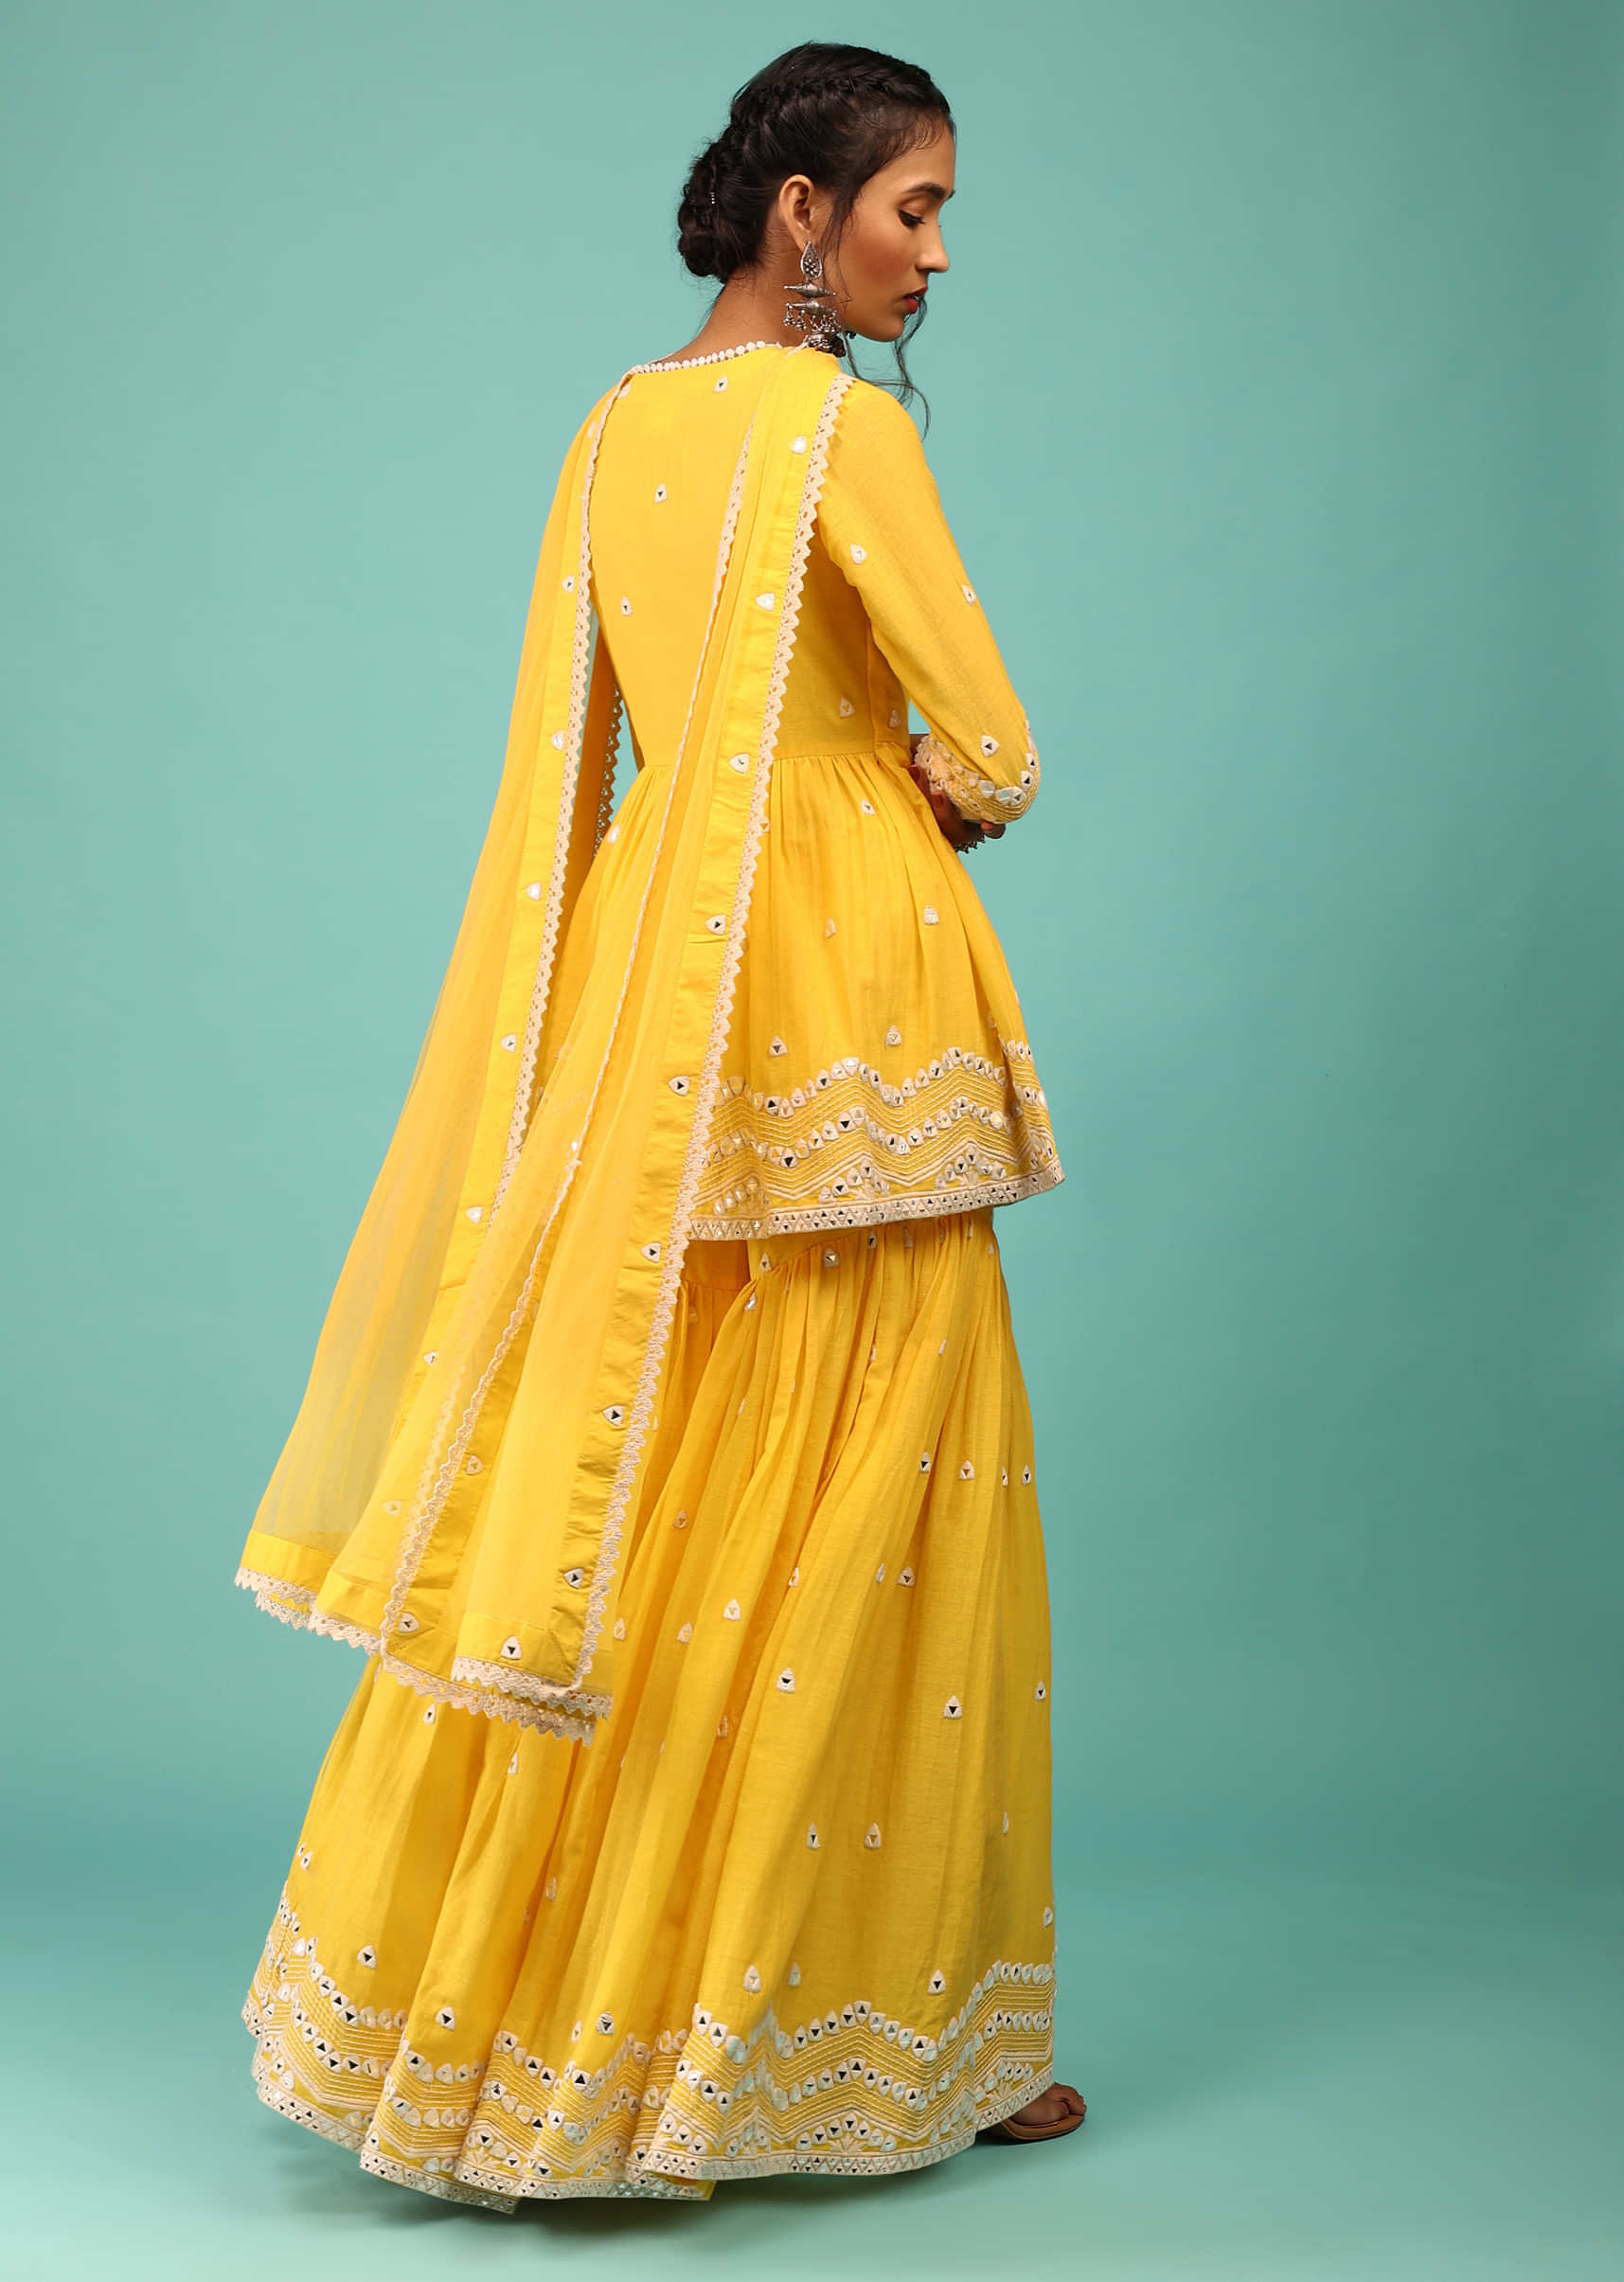 Cyber Yellow Sharara Suit In Cotton With Lucknowi Geometric Embroidery & Angarakha Peplum Top